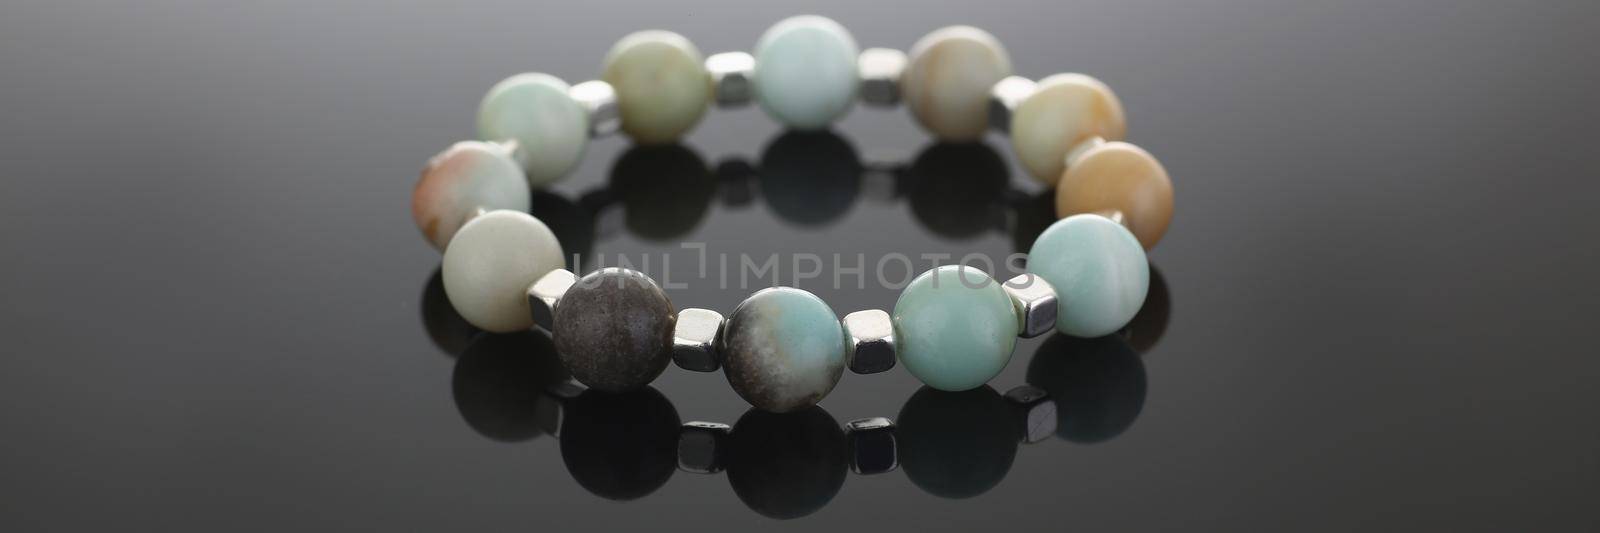 Close-up of shiny cute hand bracelet made of semiprecious stones. Real energy crystal presented on grey background with reflection. Heal, accessory concept